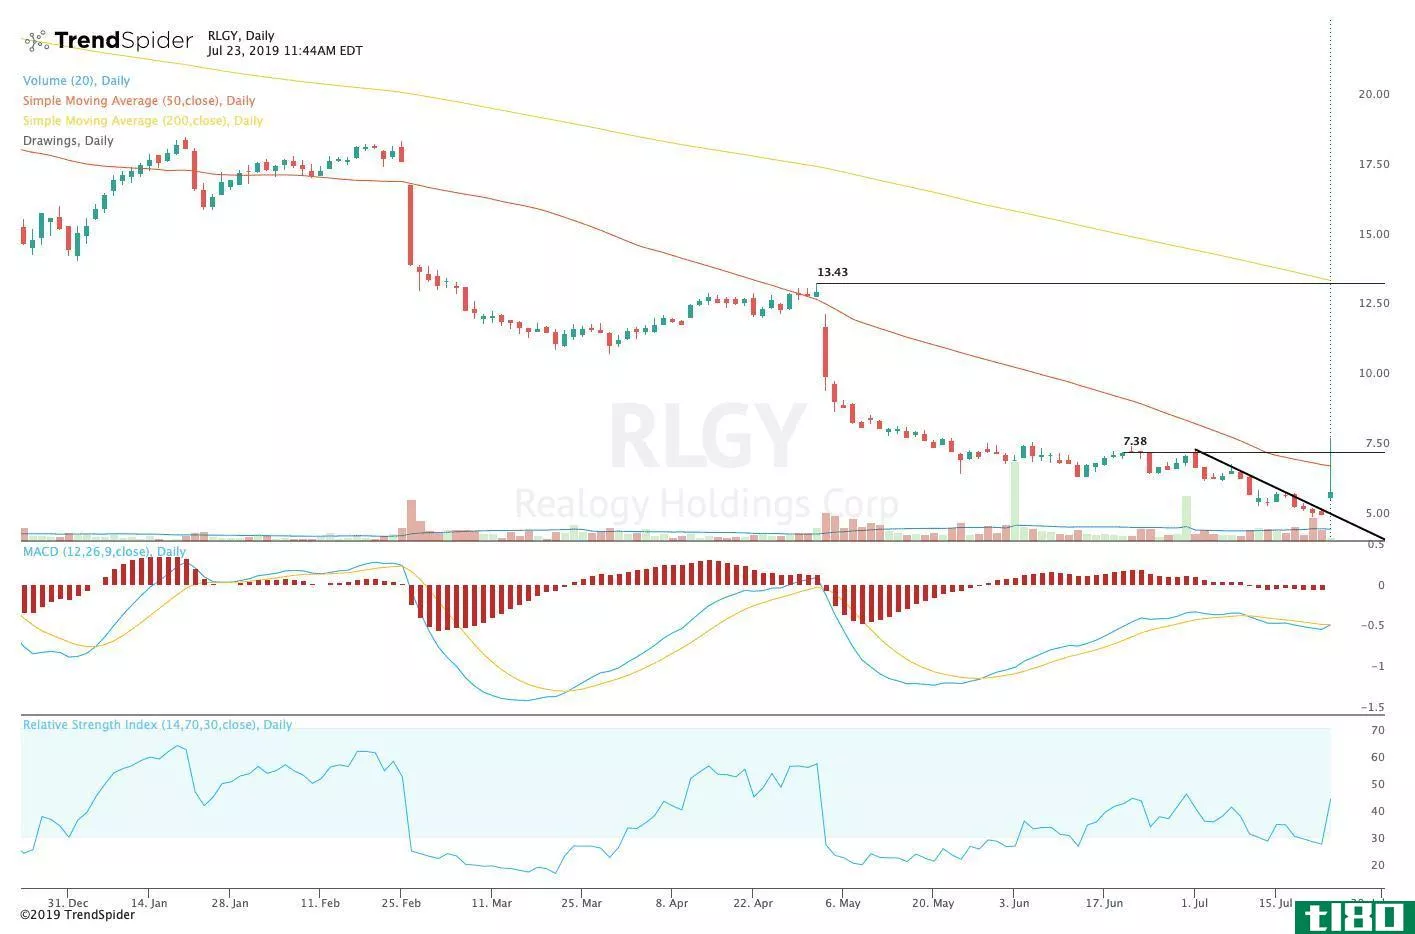 Chart showing the share price performance of Realogy Holdings Corp. (RLGY)